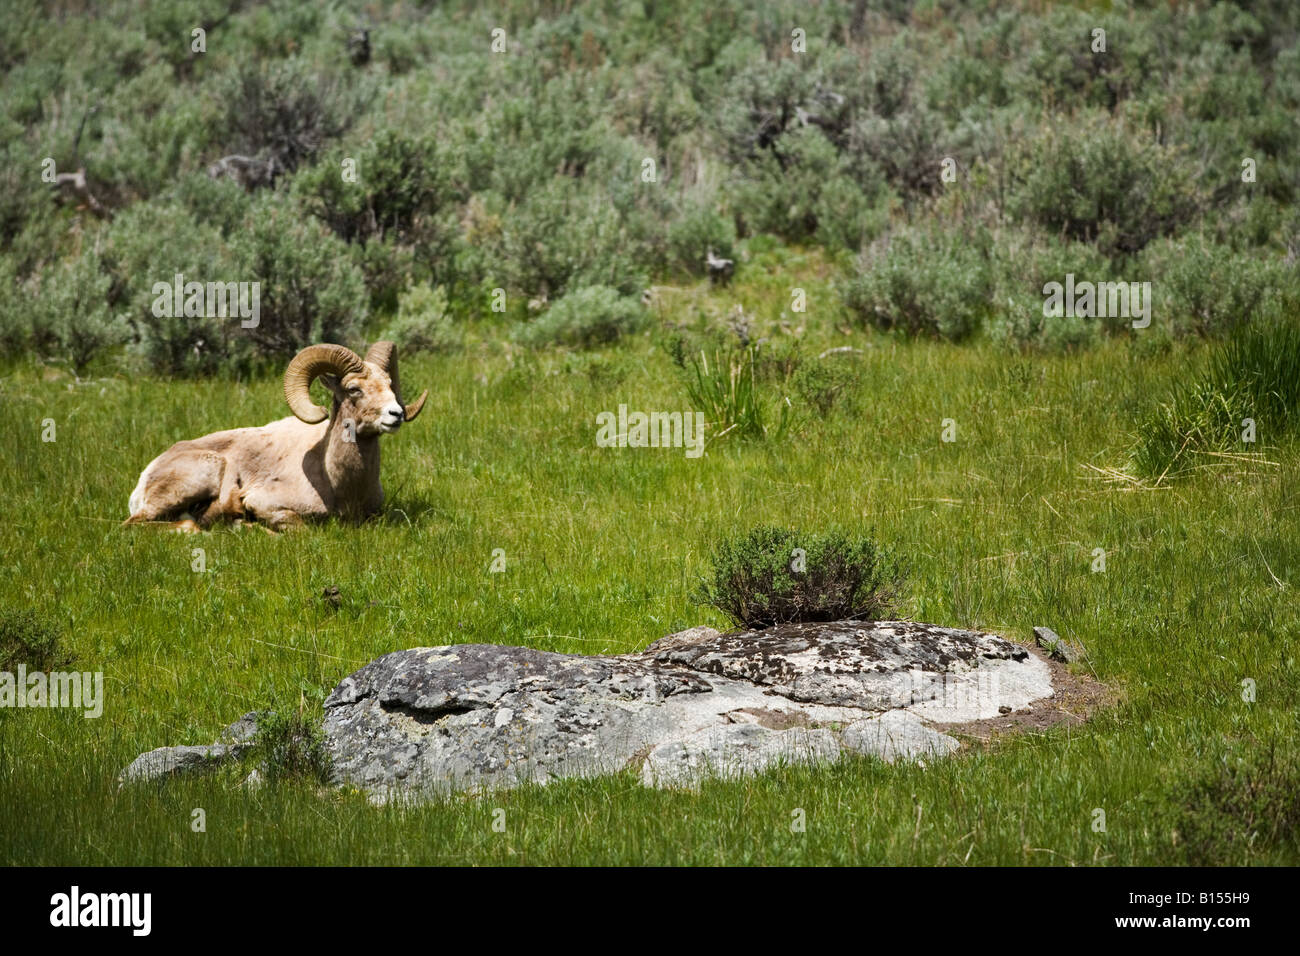 Bighorn Sheep (Ovis canadensis) in Yellowstone National Park, Wyoming Stock Photo